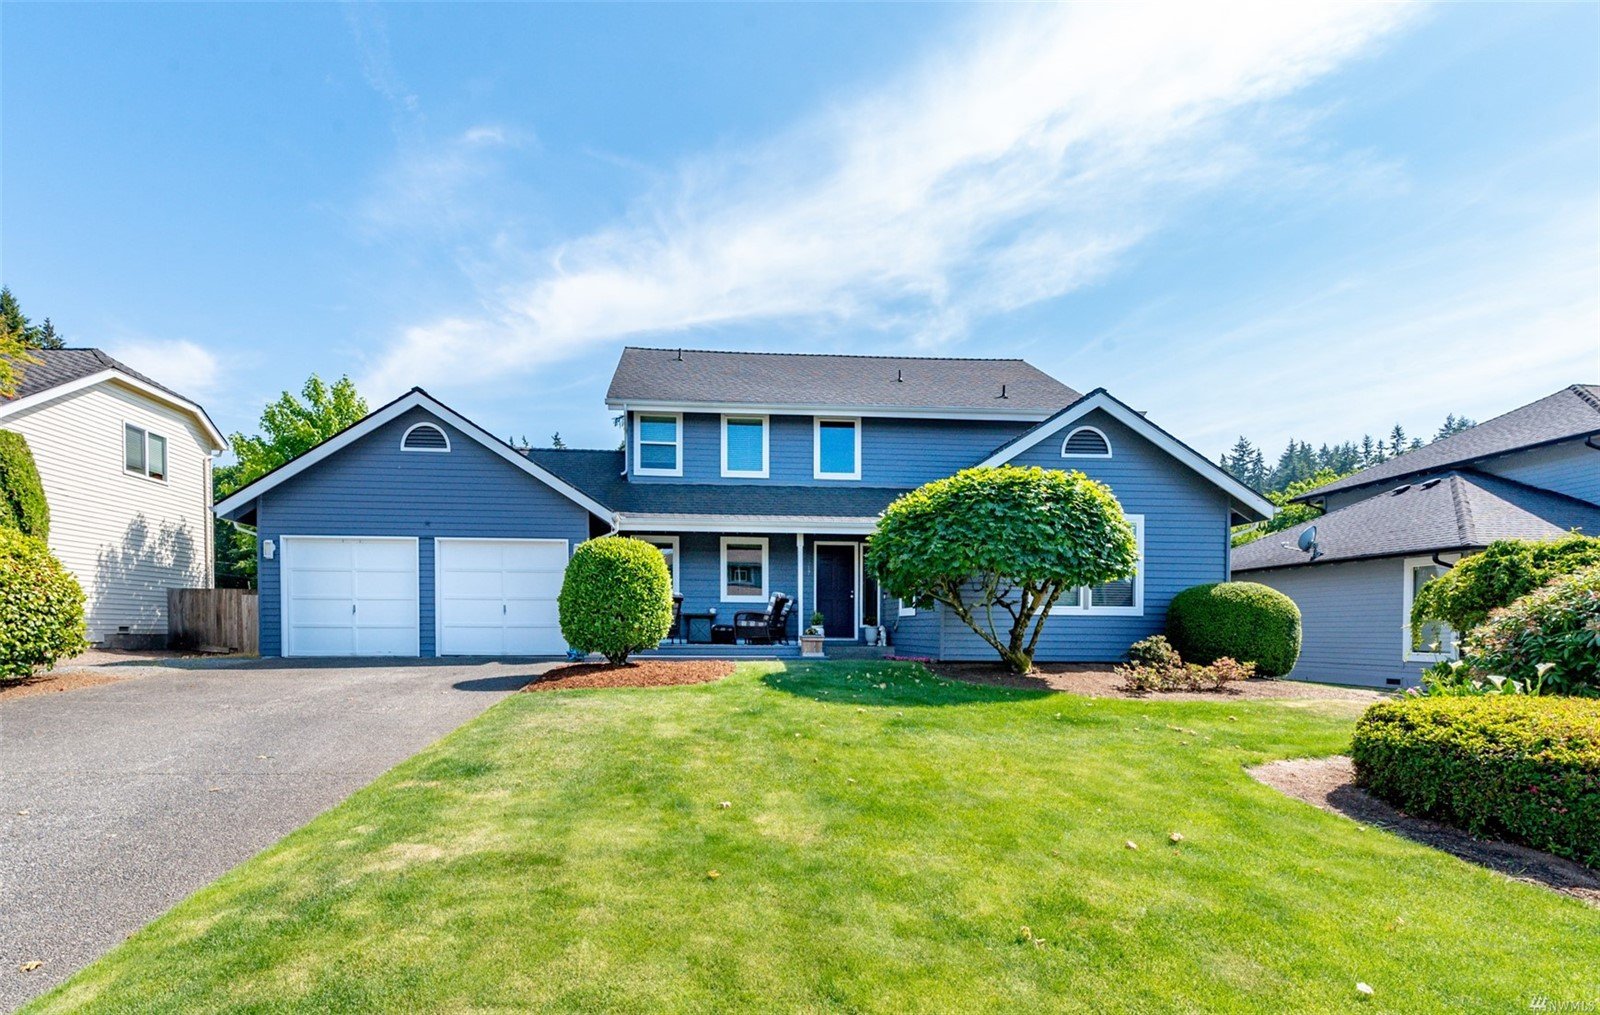 1317 S 291st Place, Federal Way